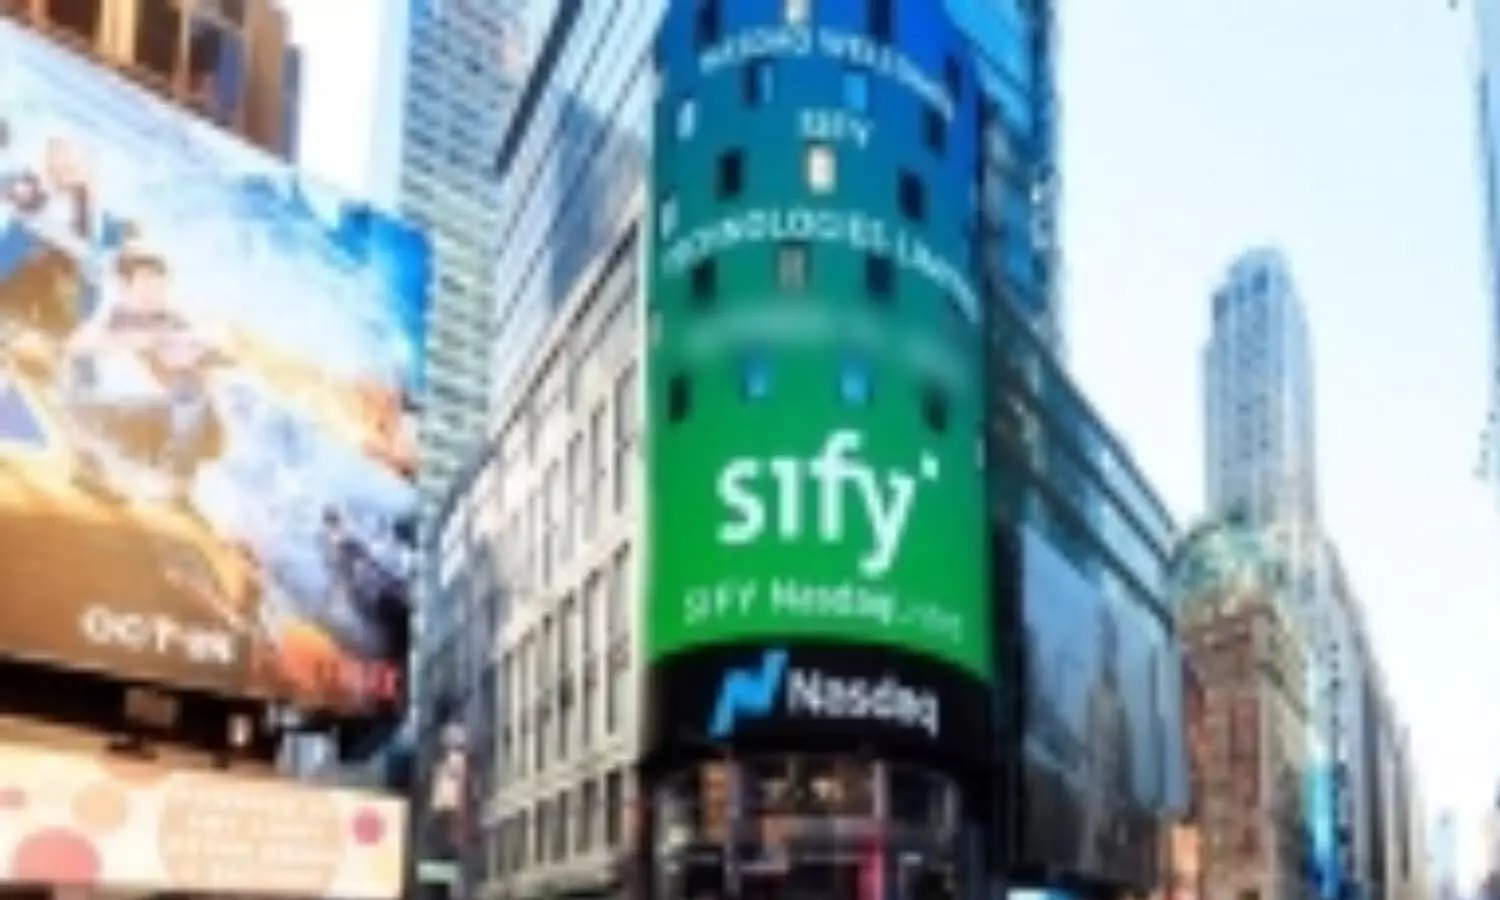 Sify Technologies to set up data centres with 200 MW capacity